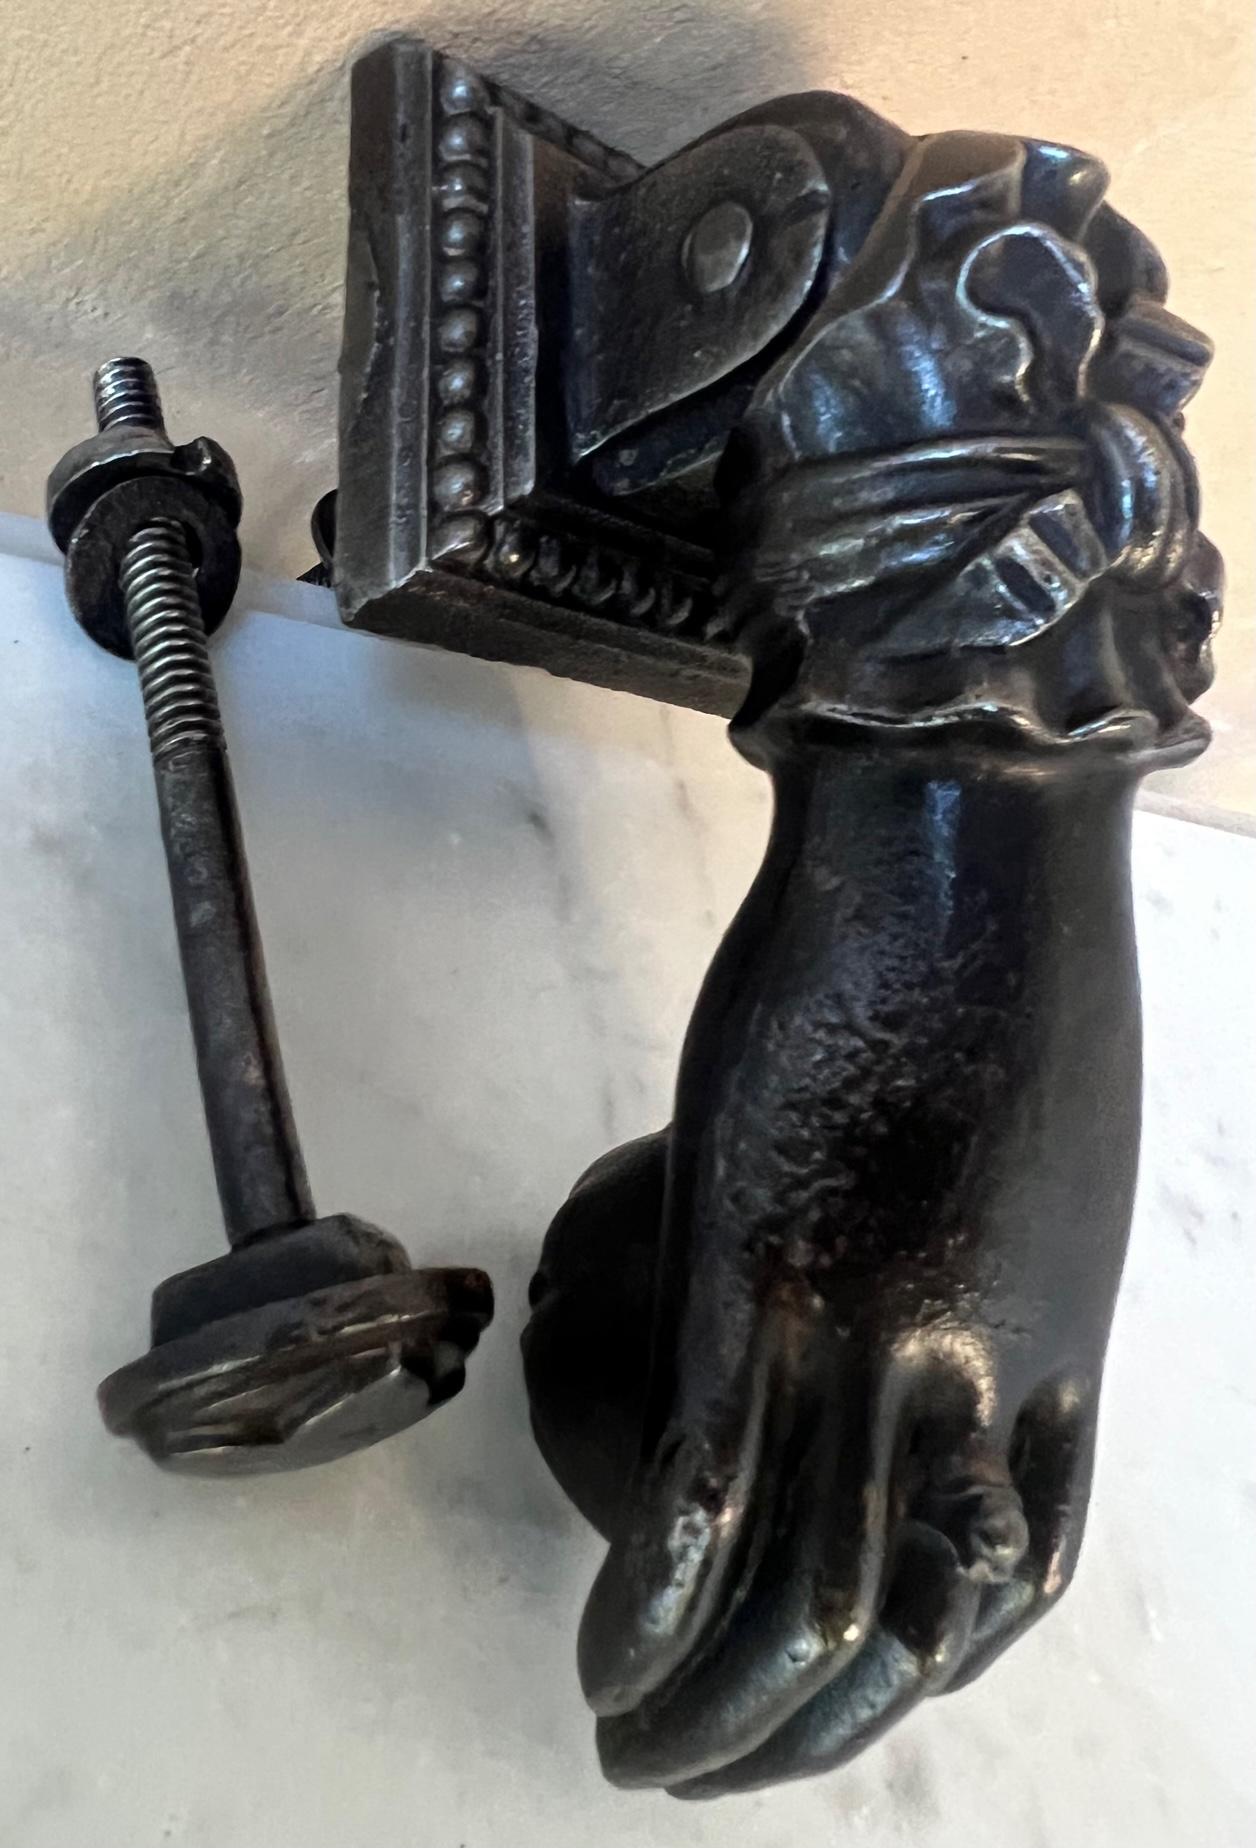 Classic French cast iron door knocker, in the shape of a ladies hand wearing a ring and a beautiful cuff, holding a ball. The set includes a round decorated back plate. Made in the mid to late 19th century.
Measurements taken when hand is hanging